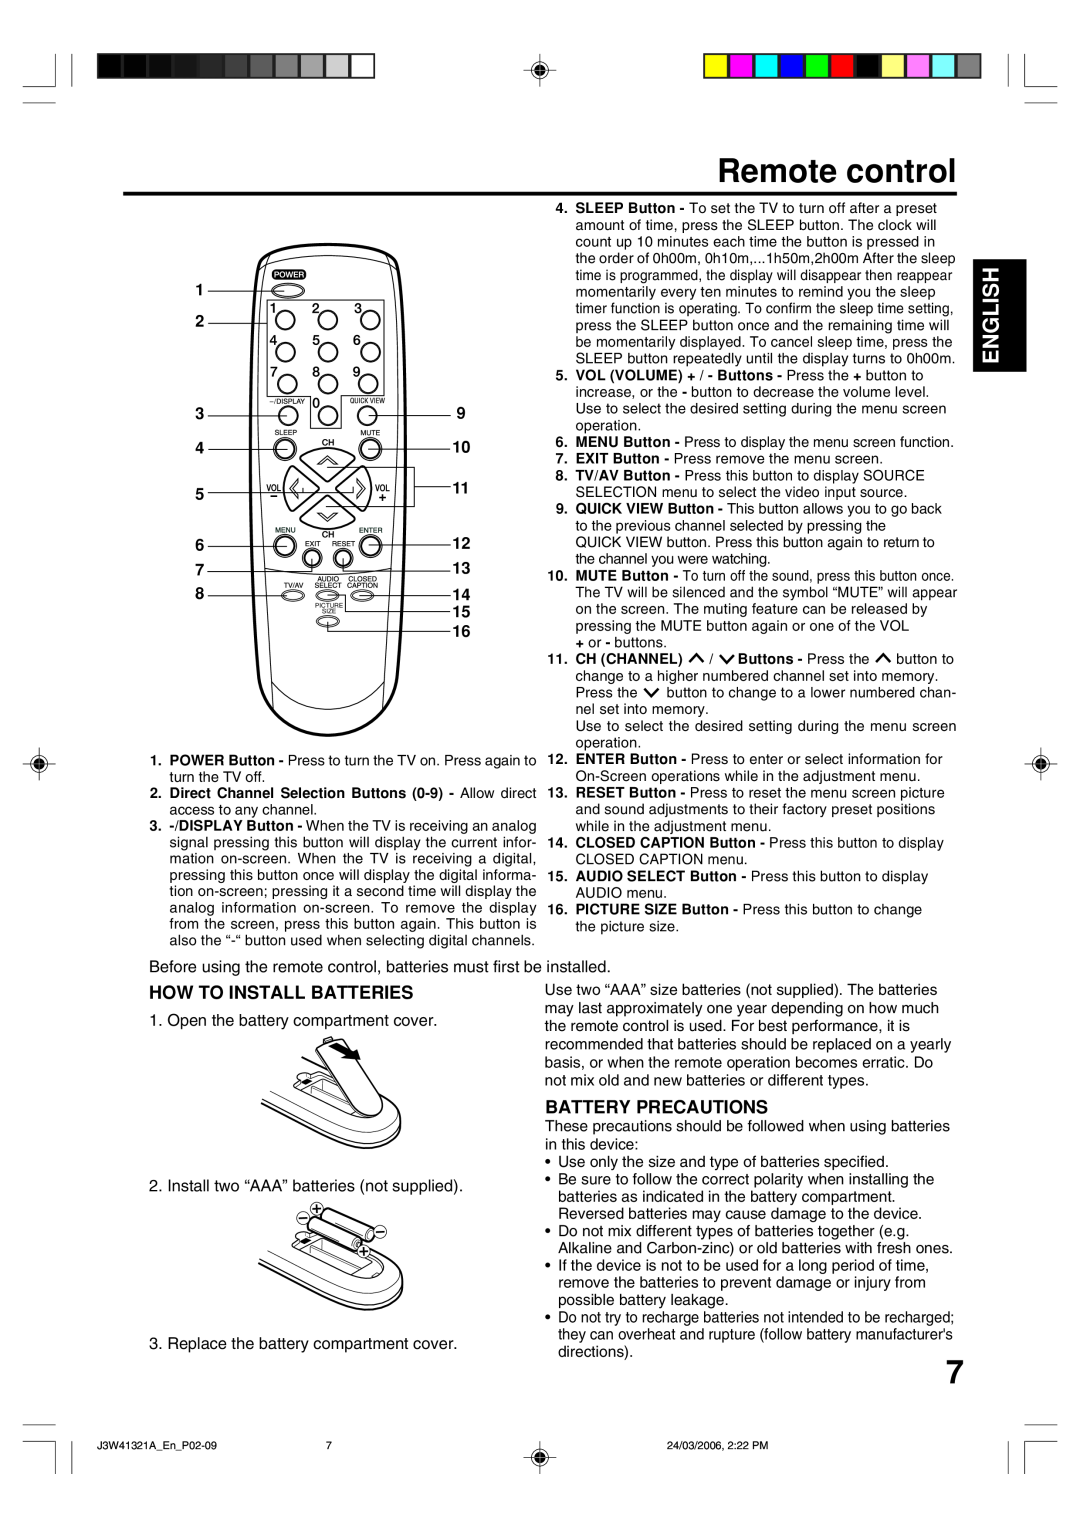 Zenith J3W41321A warranty Remote control, English, How To Install Batteries, Battery Precautions 